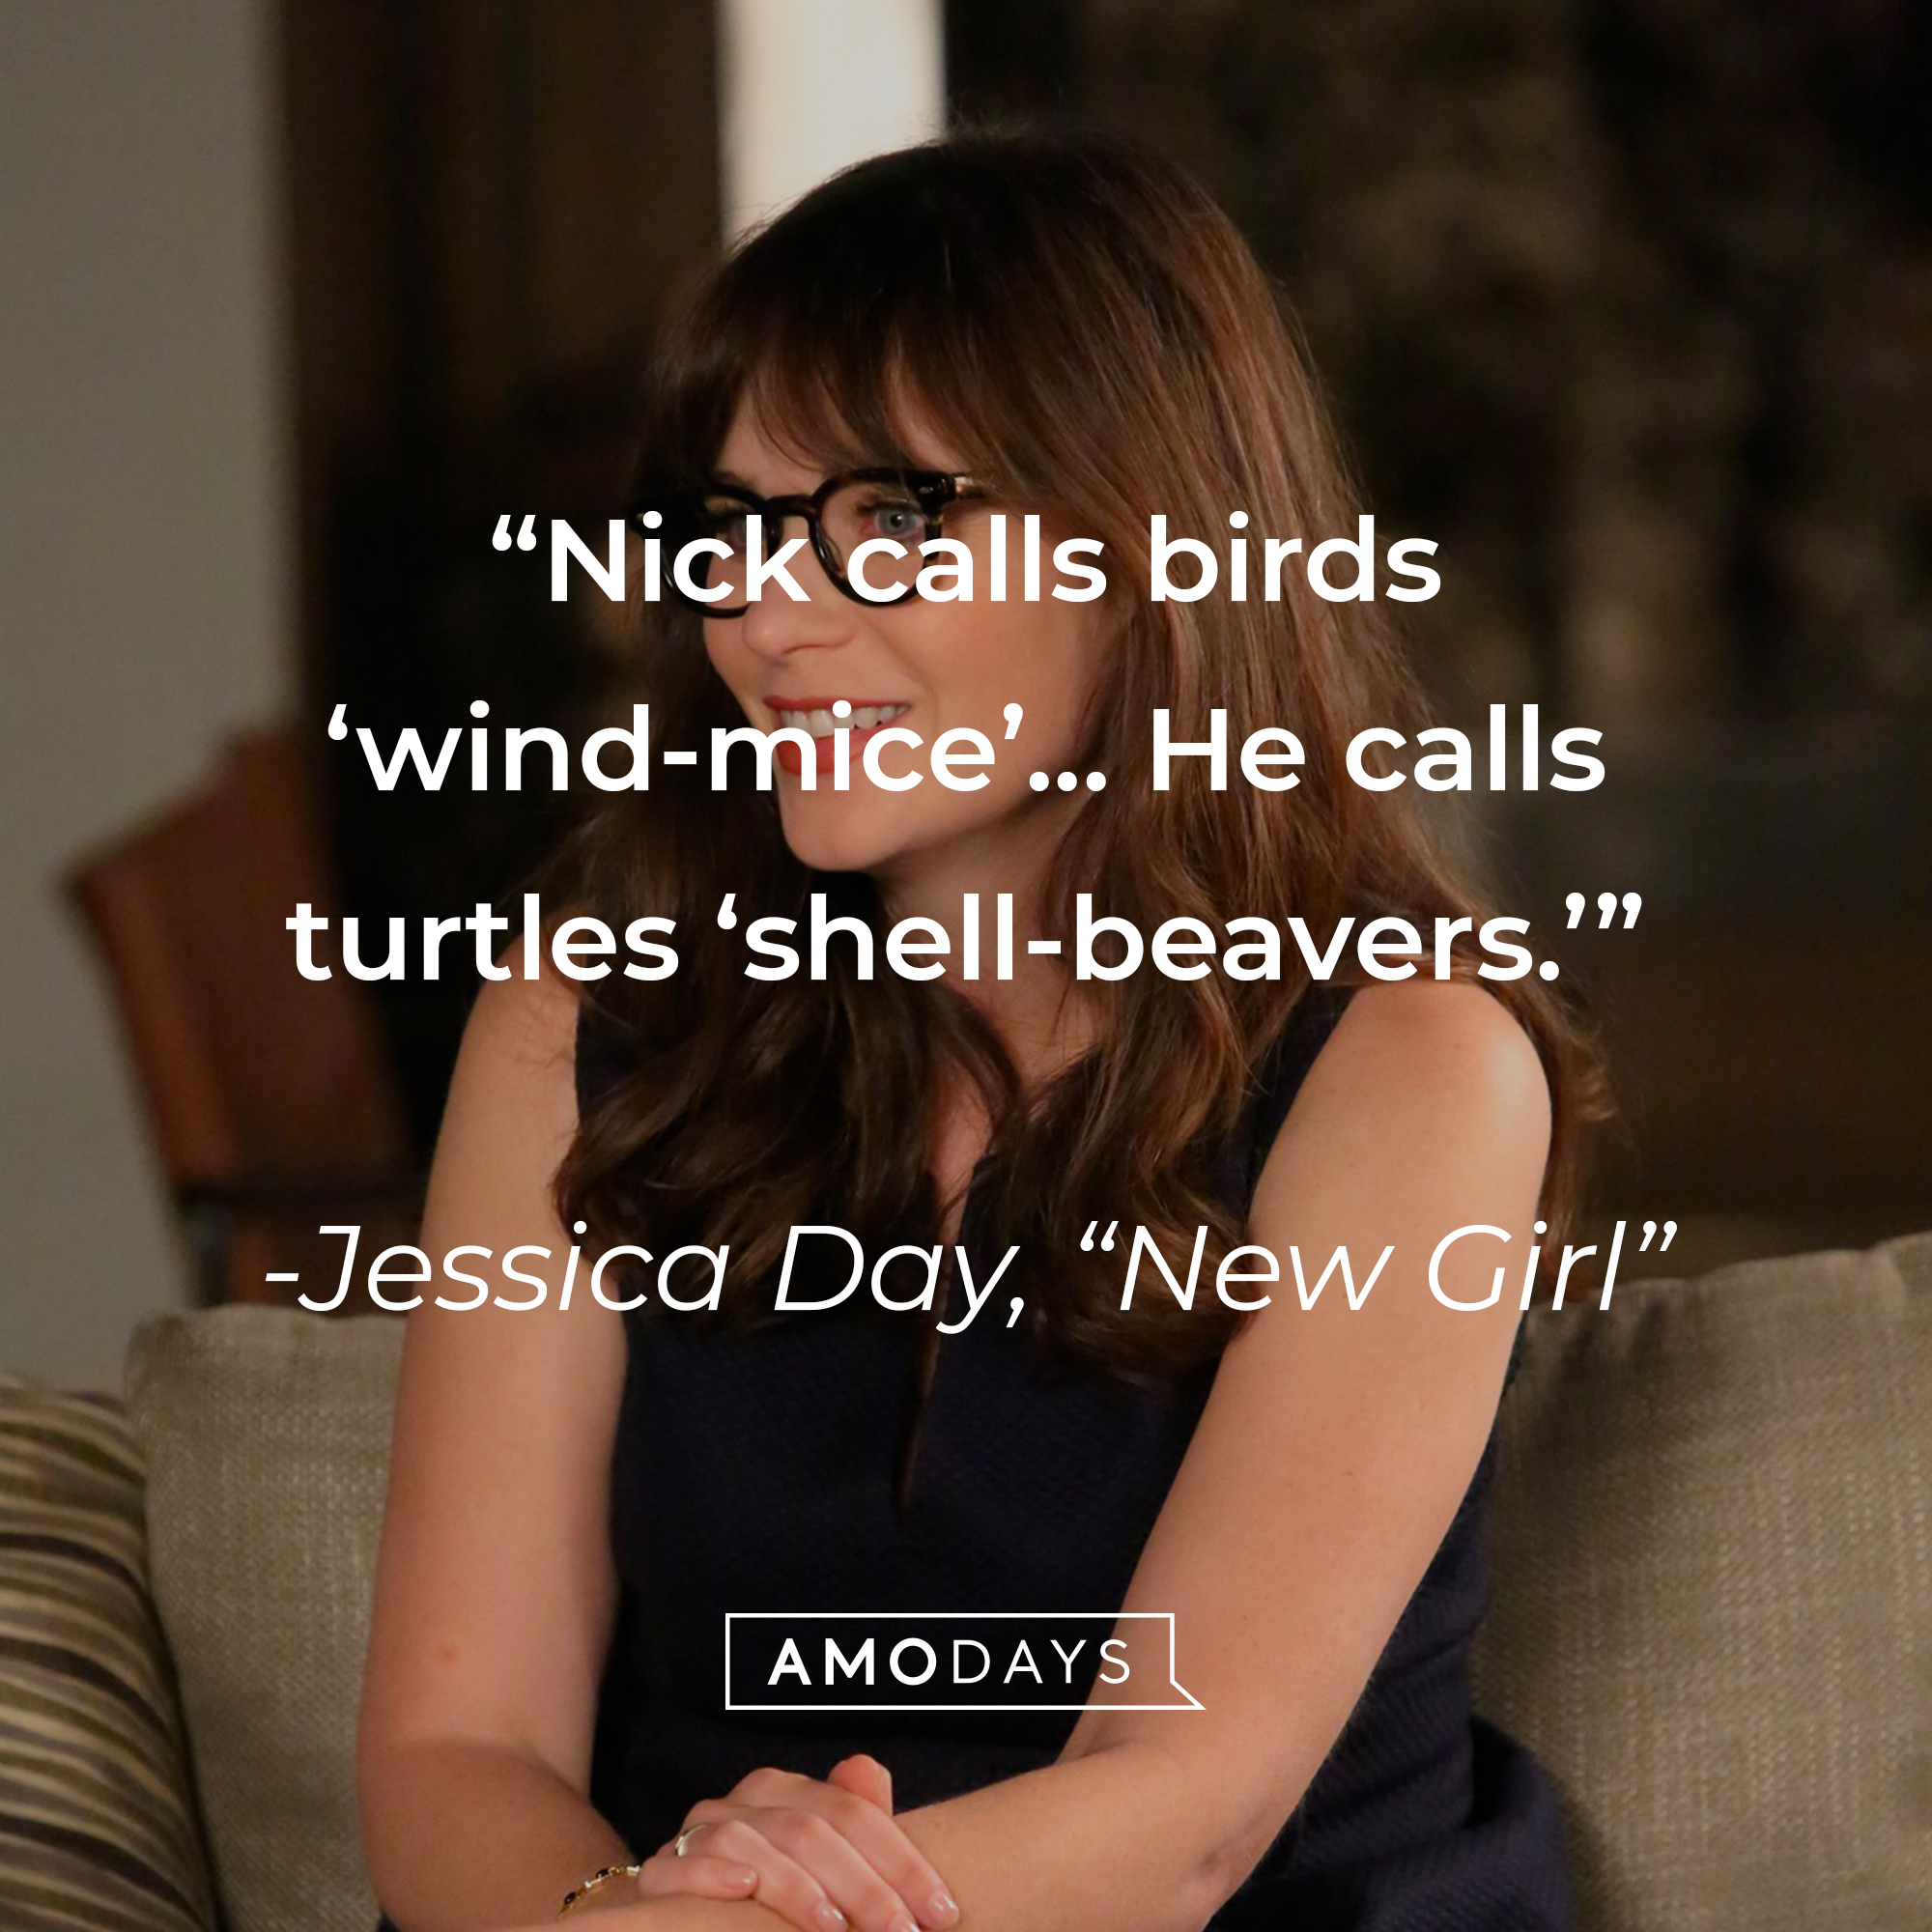 Jessica Day’s quote from “New Girl”: “Nick calls birds ‘wind-mice’... He calls turtles ‘shell-beavers.'” | Source: facebook.com/OfficialNewGirl